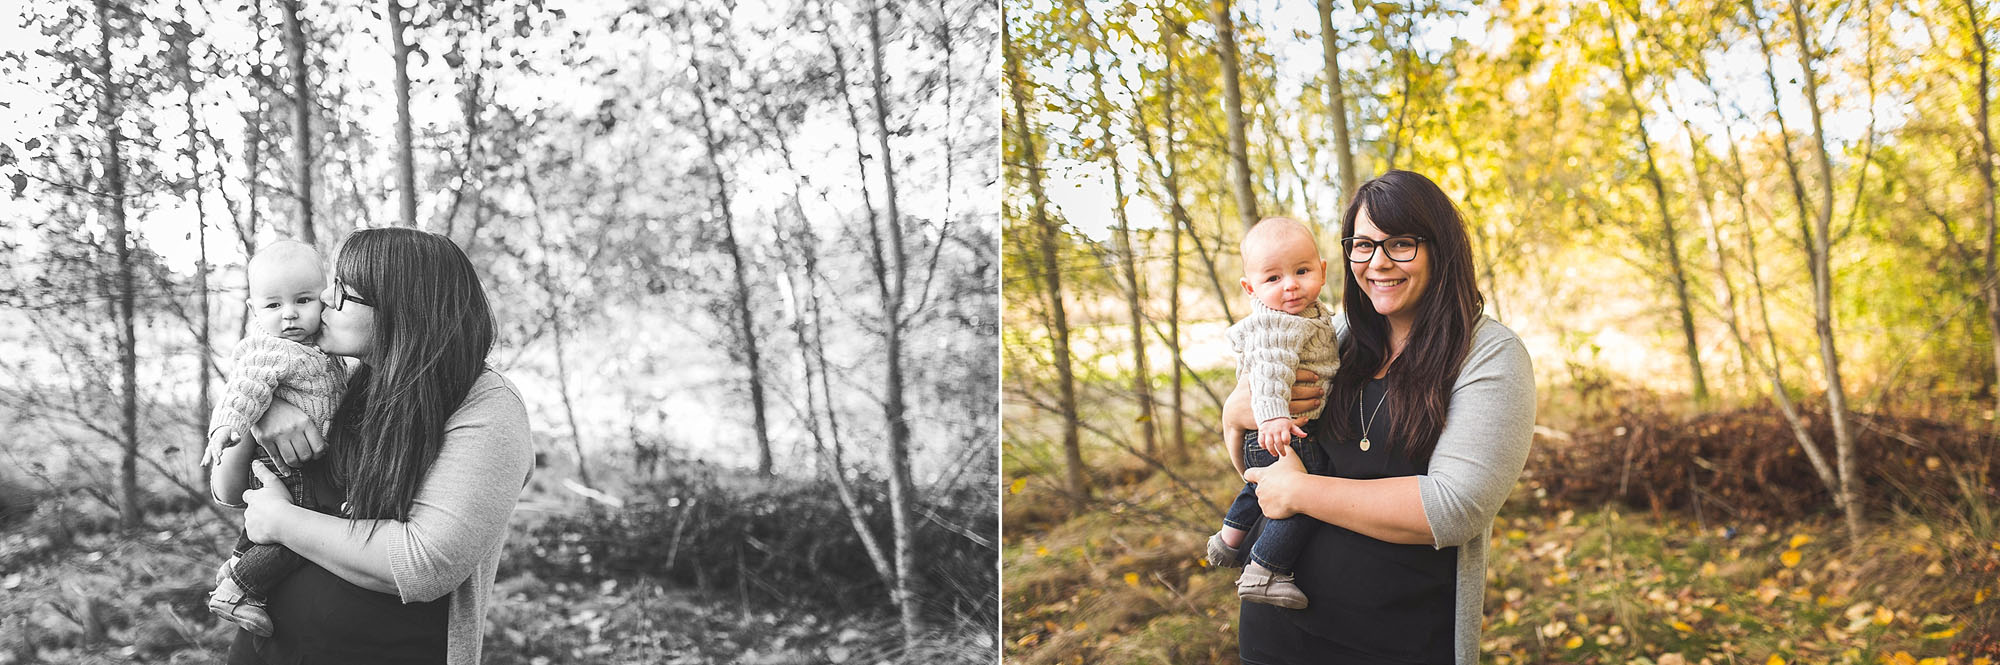 ashley vos photography seattle area lifestyle family and birth photography_0101.jpg